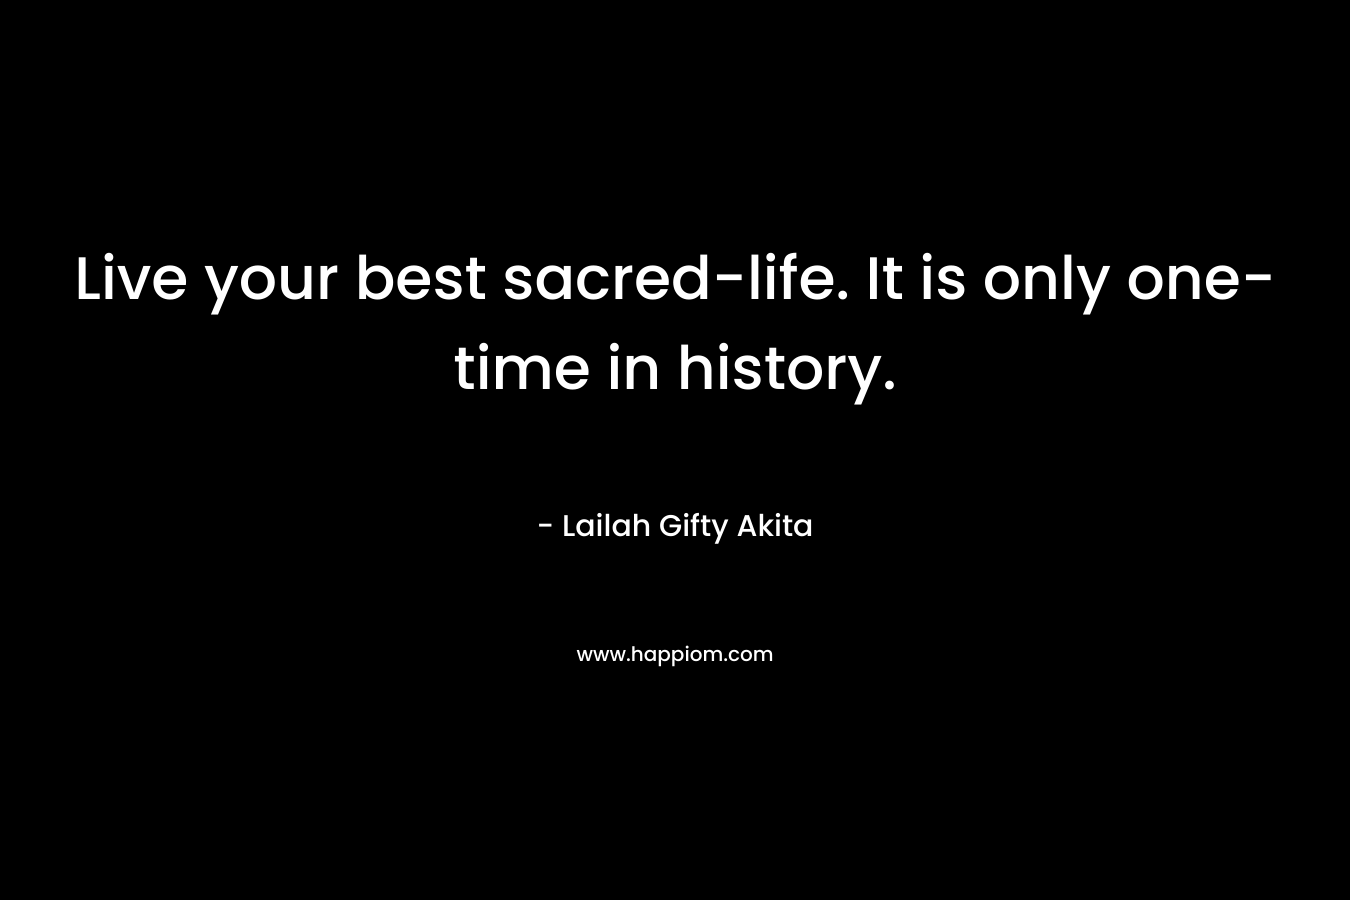 Live your best sacred-life. It is only one-time in history. – Lailah Gifty Akita